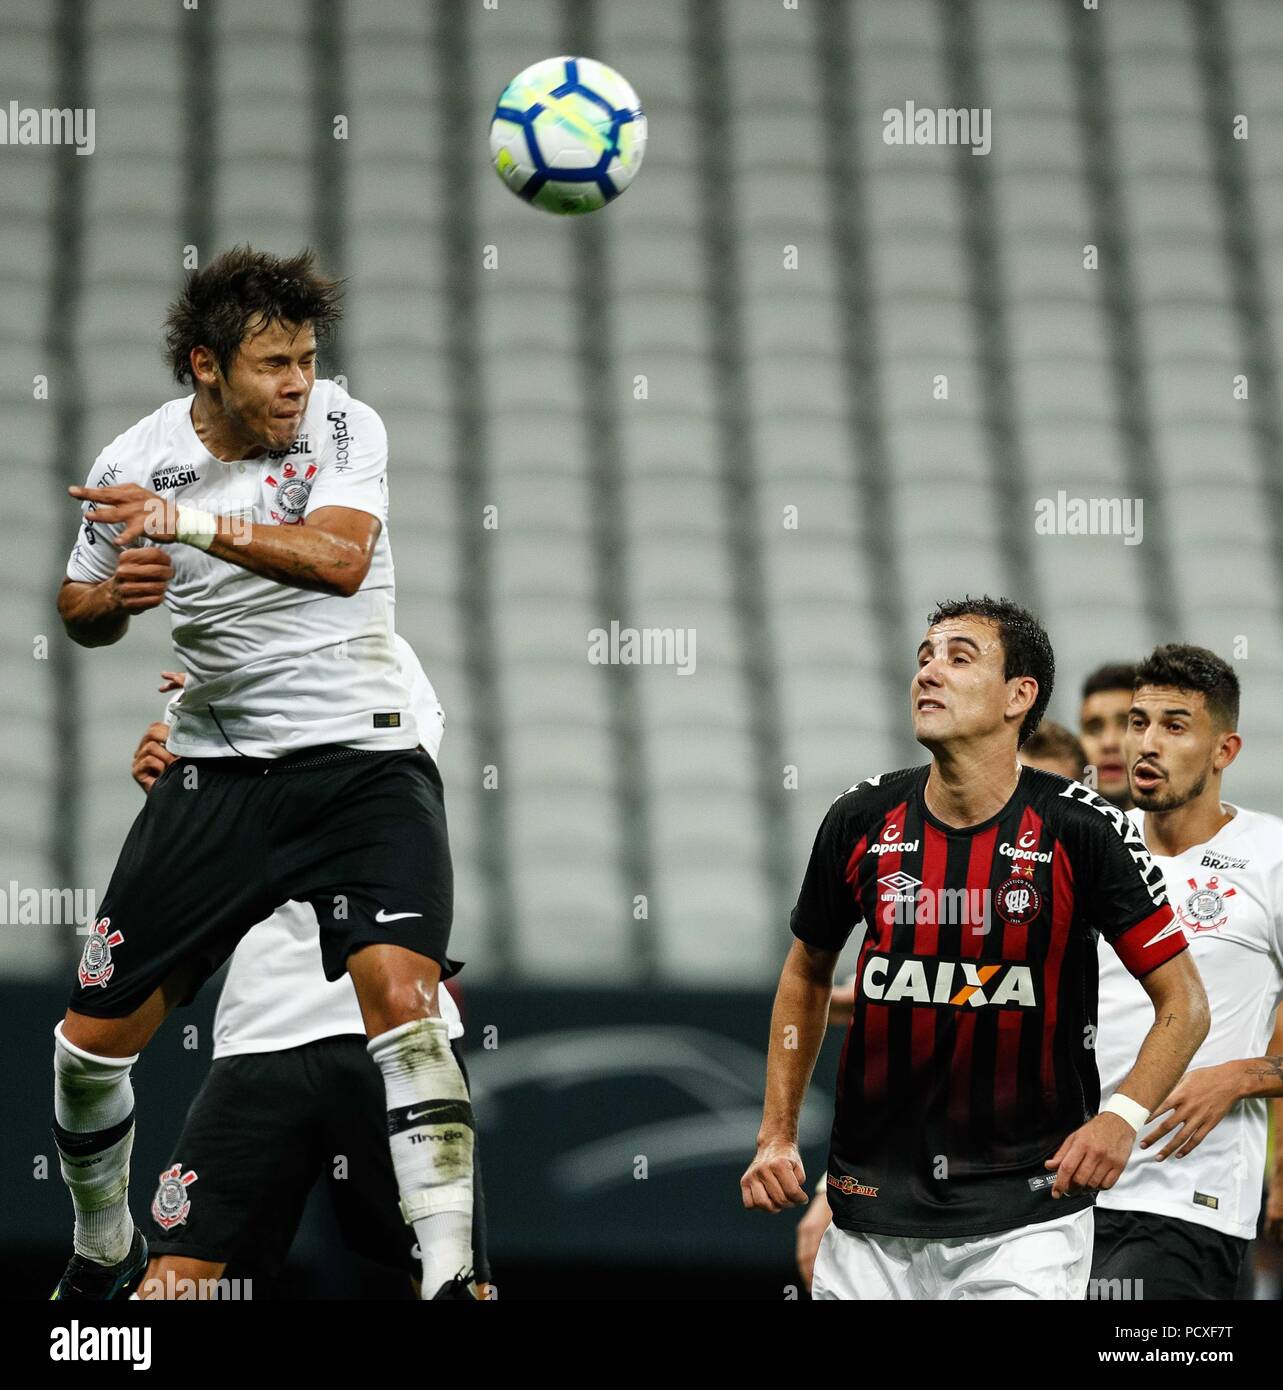 Sao Paulo, Brazil. 4 August 2018. Angel Romero of Corinthians takes away  the ball during Corinthians vs. Atlético Paranaense match valid for the  17th round of the 2018 Brazilian Championship, held at